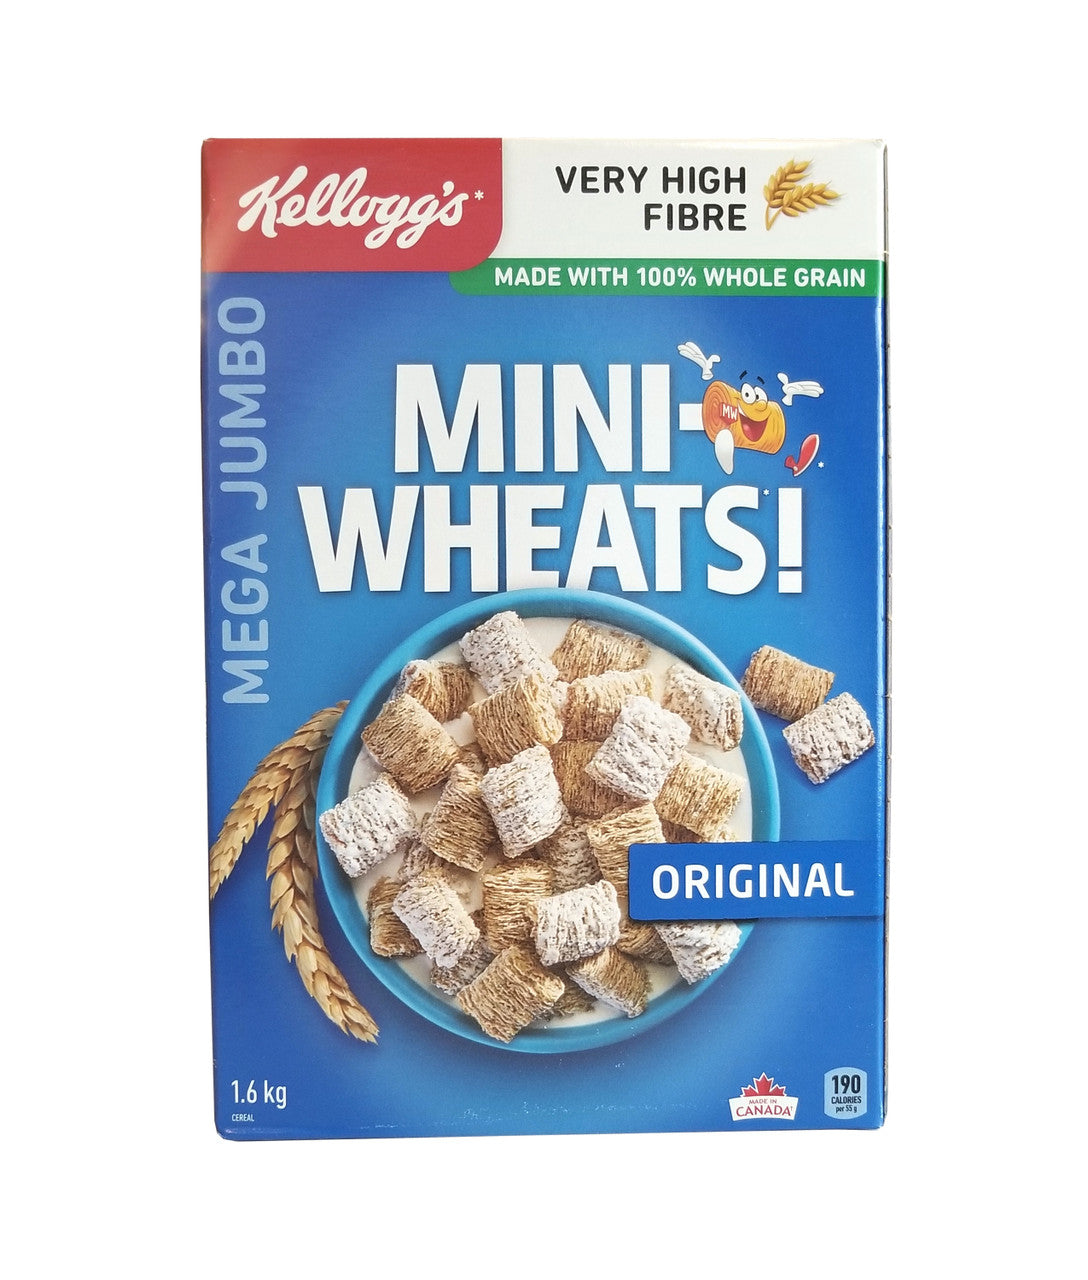 Kellogg's Mini-Wheats Cereal Jumbo Size 1.6kg/3.5 lbs., {Imported from Canada}